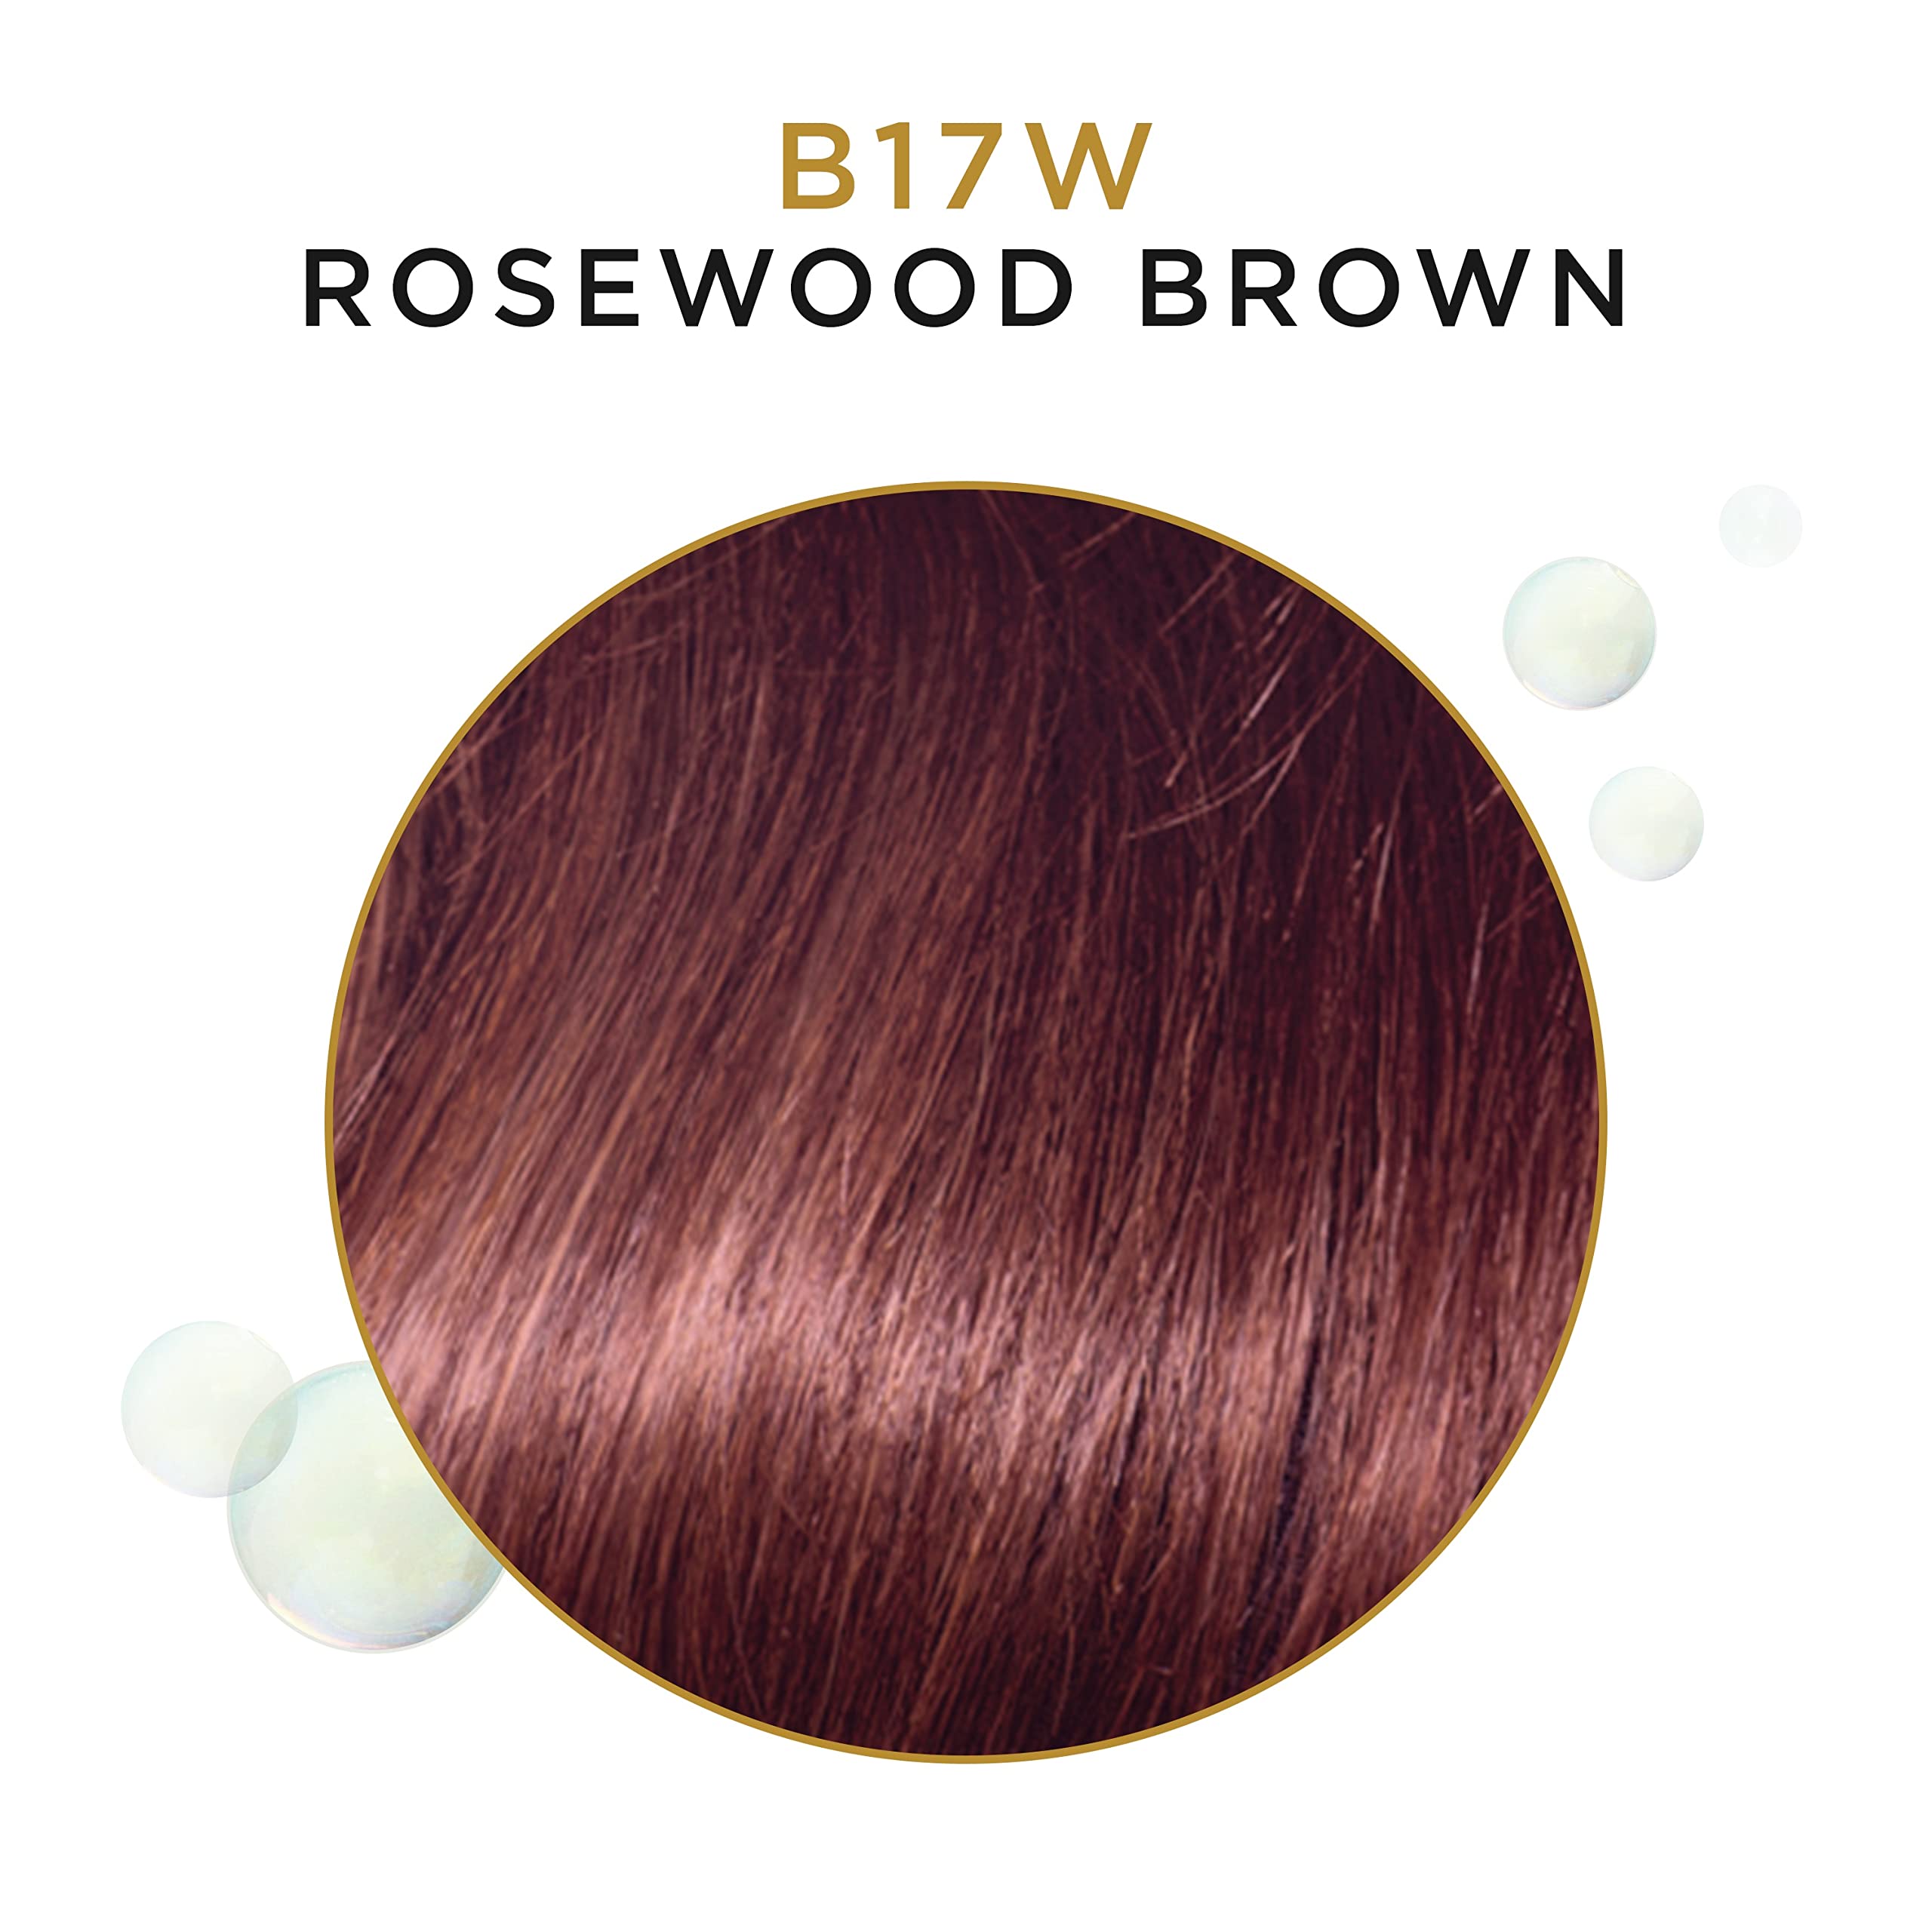 Clairol Professional Beautiful Collection Hair Color, 17w Rosewood Brown, 3 oz